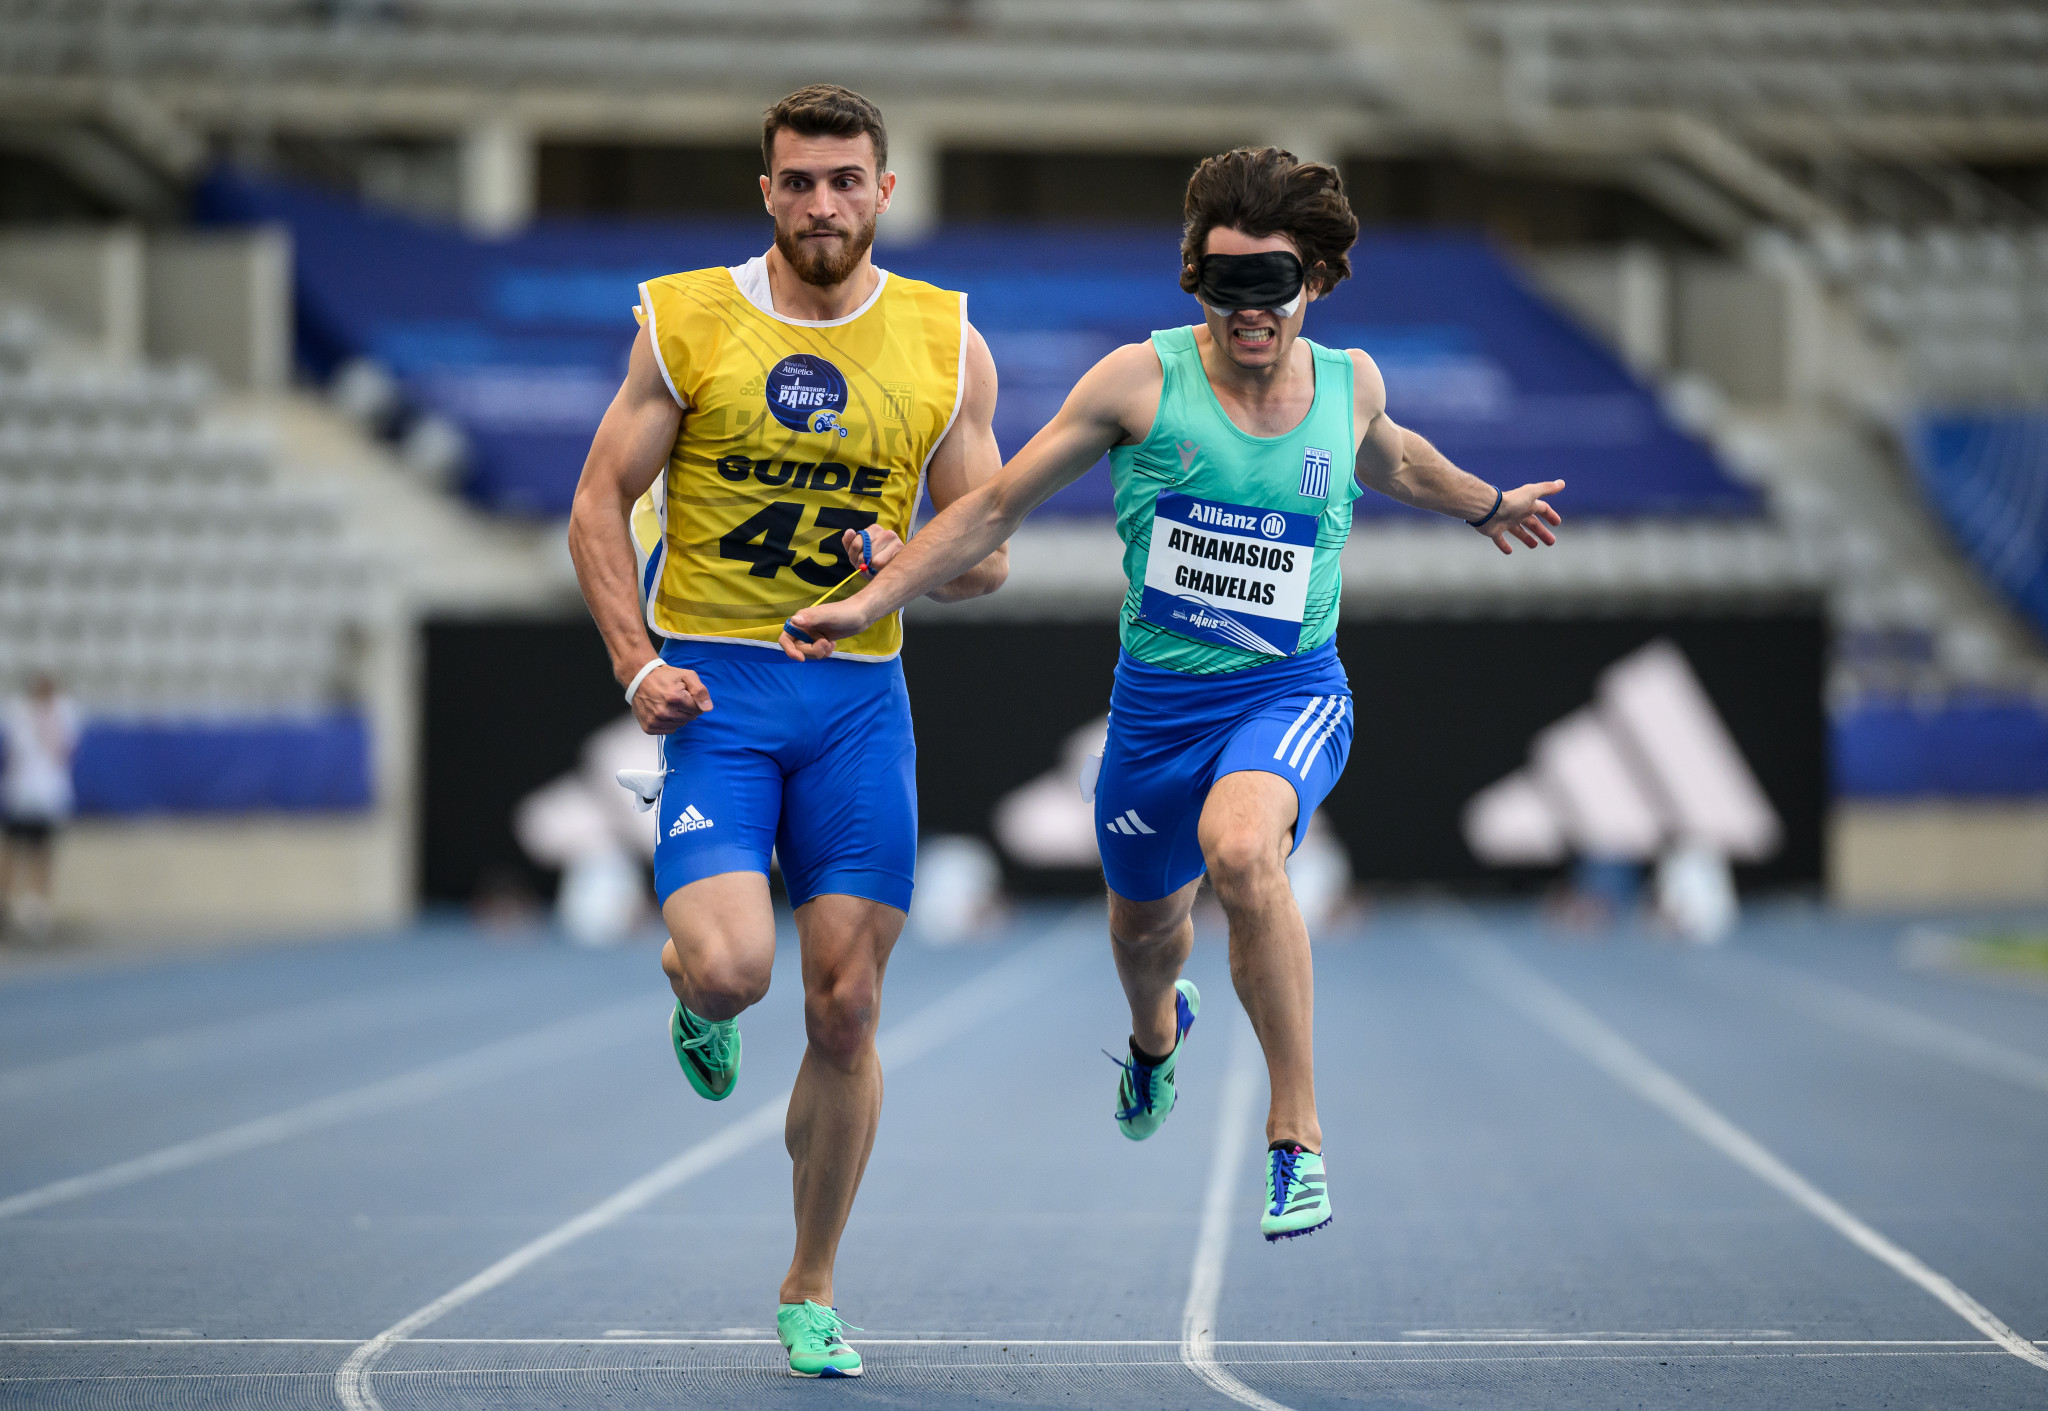 Ghavelas ensures French medal woes continue at World Para Athletics Championships